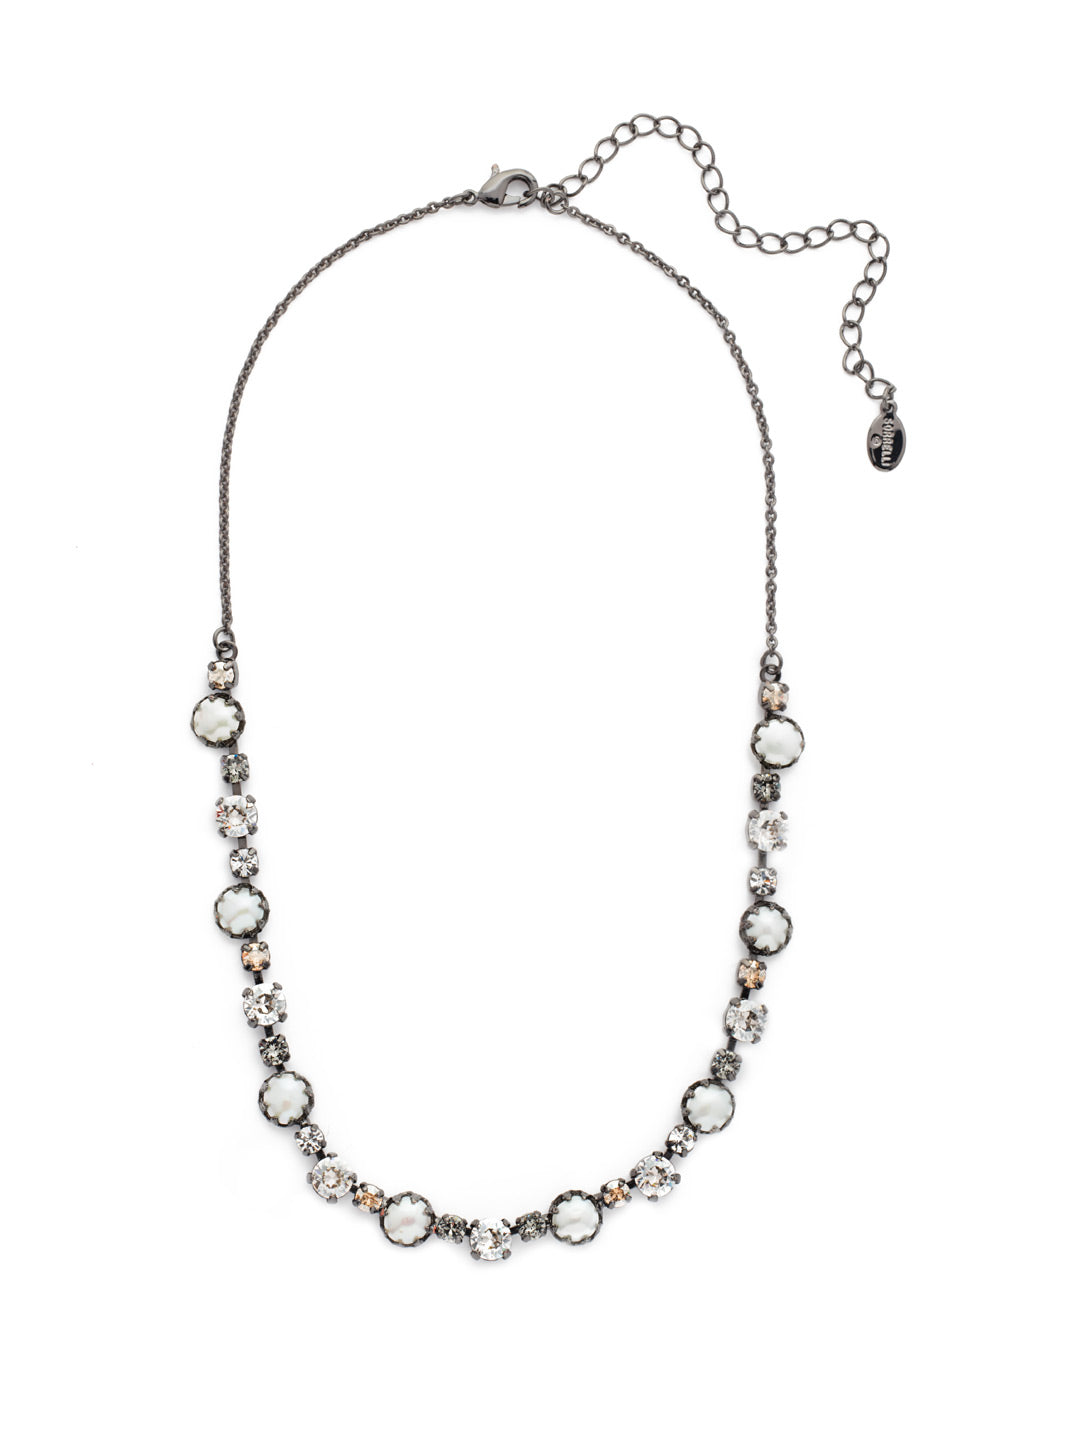 Emmanuella Tennis Necklace - NES12GMGNS - <p>The Emmanuella Tennis Necklace should be a jewelry lover's must-have. What more could you want than its classic pearls, light and dark sparkling crystals in varying sizes and a chain that adjusts to your perfect length? From Sorrelli's Golden Shadow collection in our Gun Metal finish.</p>